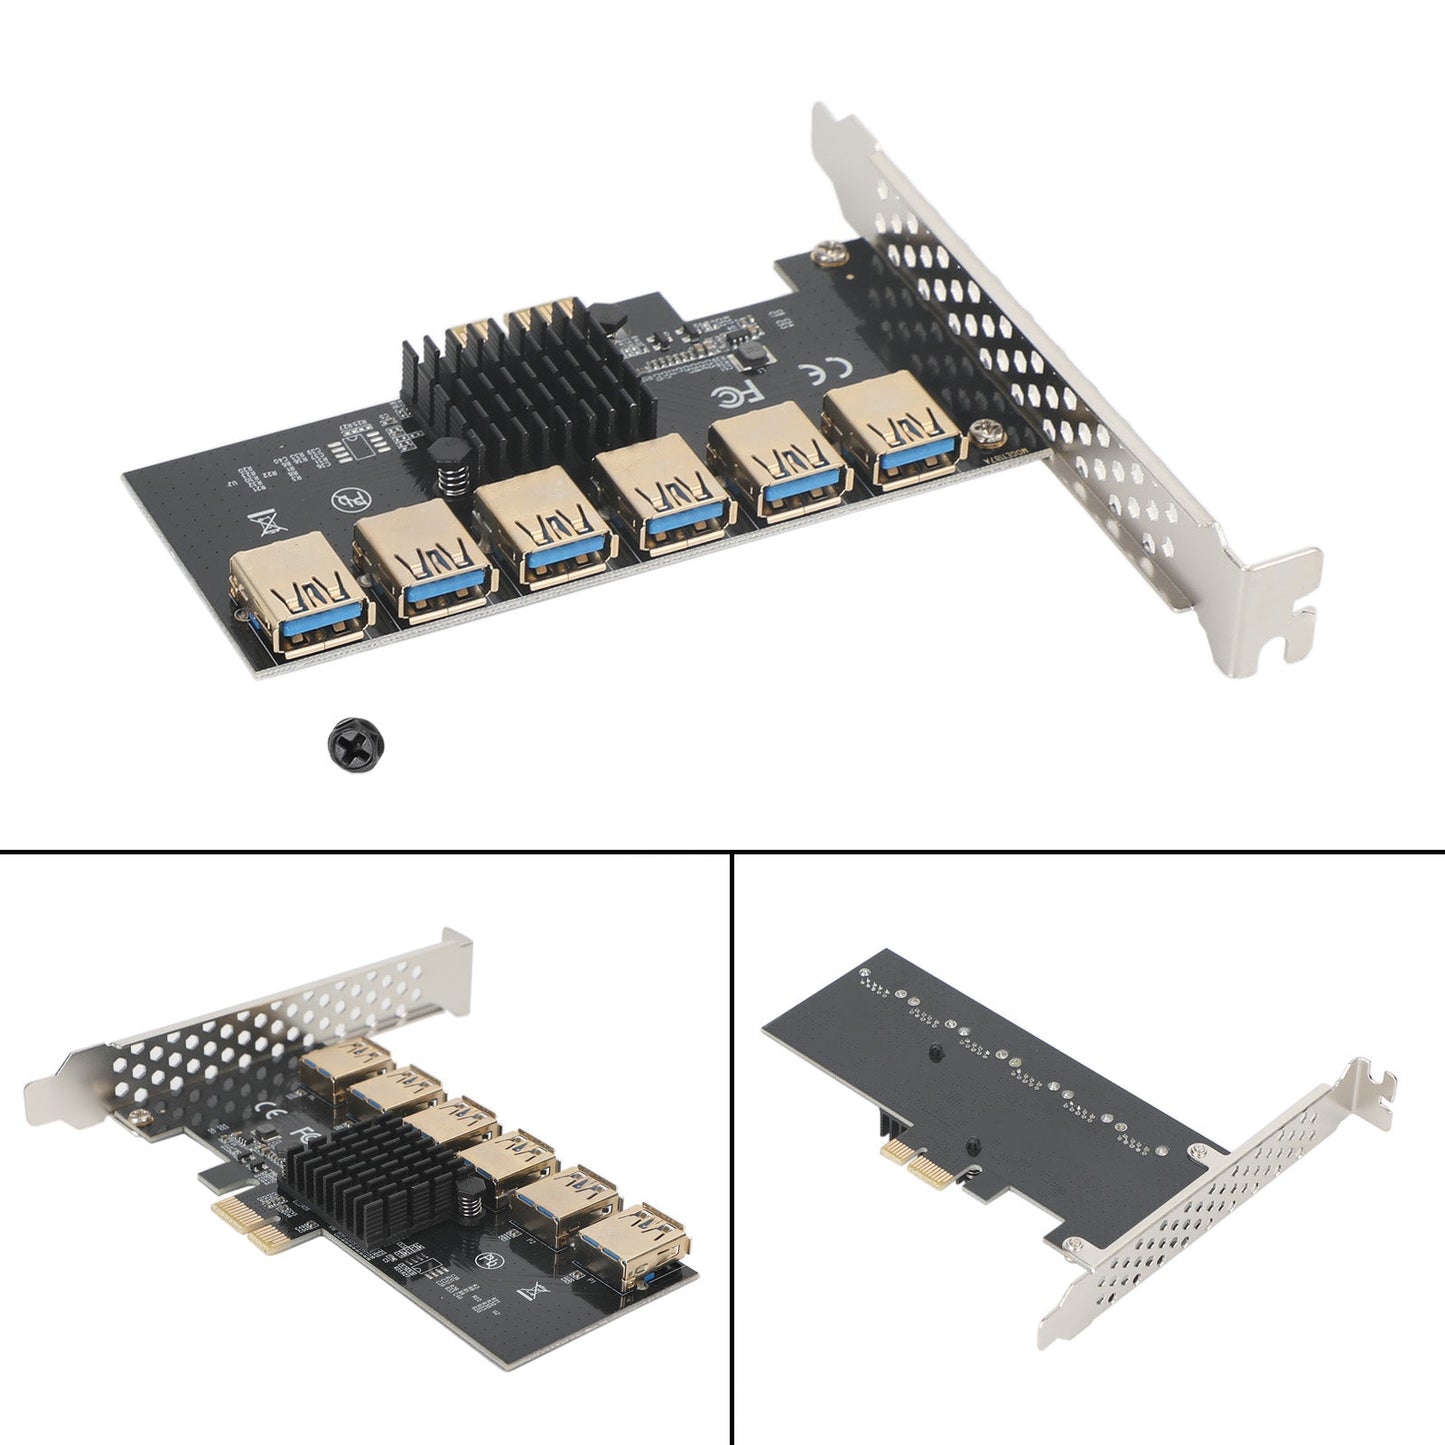 PCI-E 1 to 6 Riser Card USB 3.0 Adapter Multiplier Card fit for Bitcoin Mining